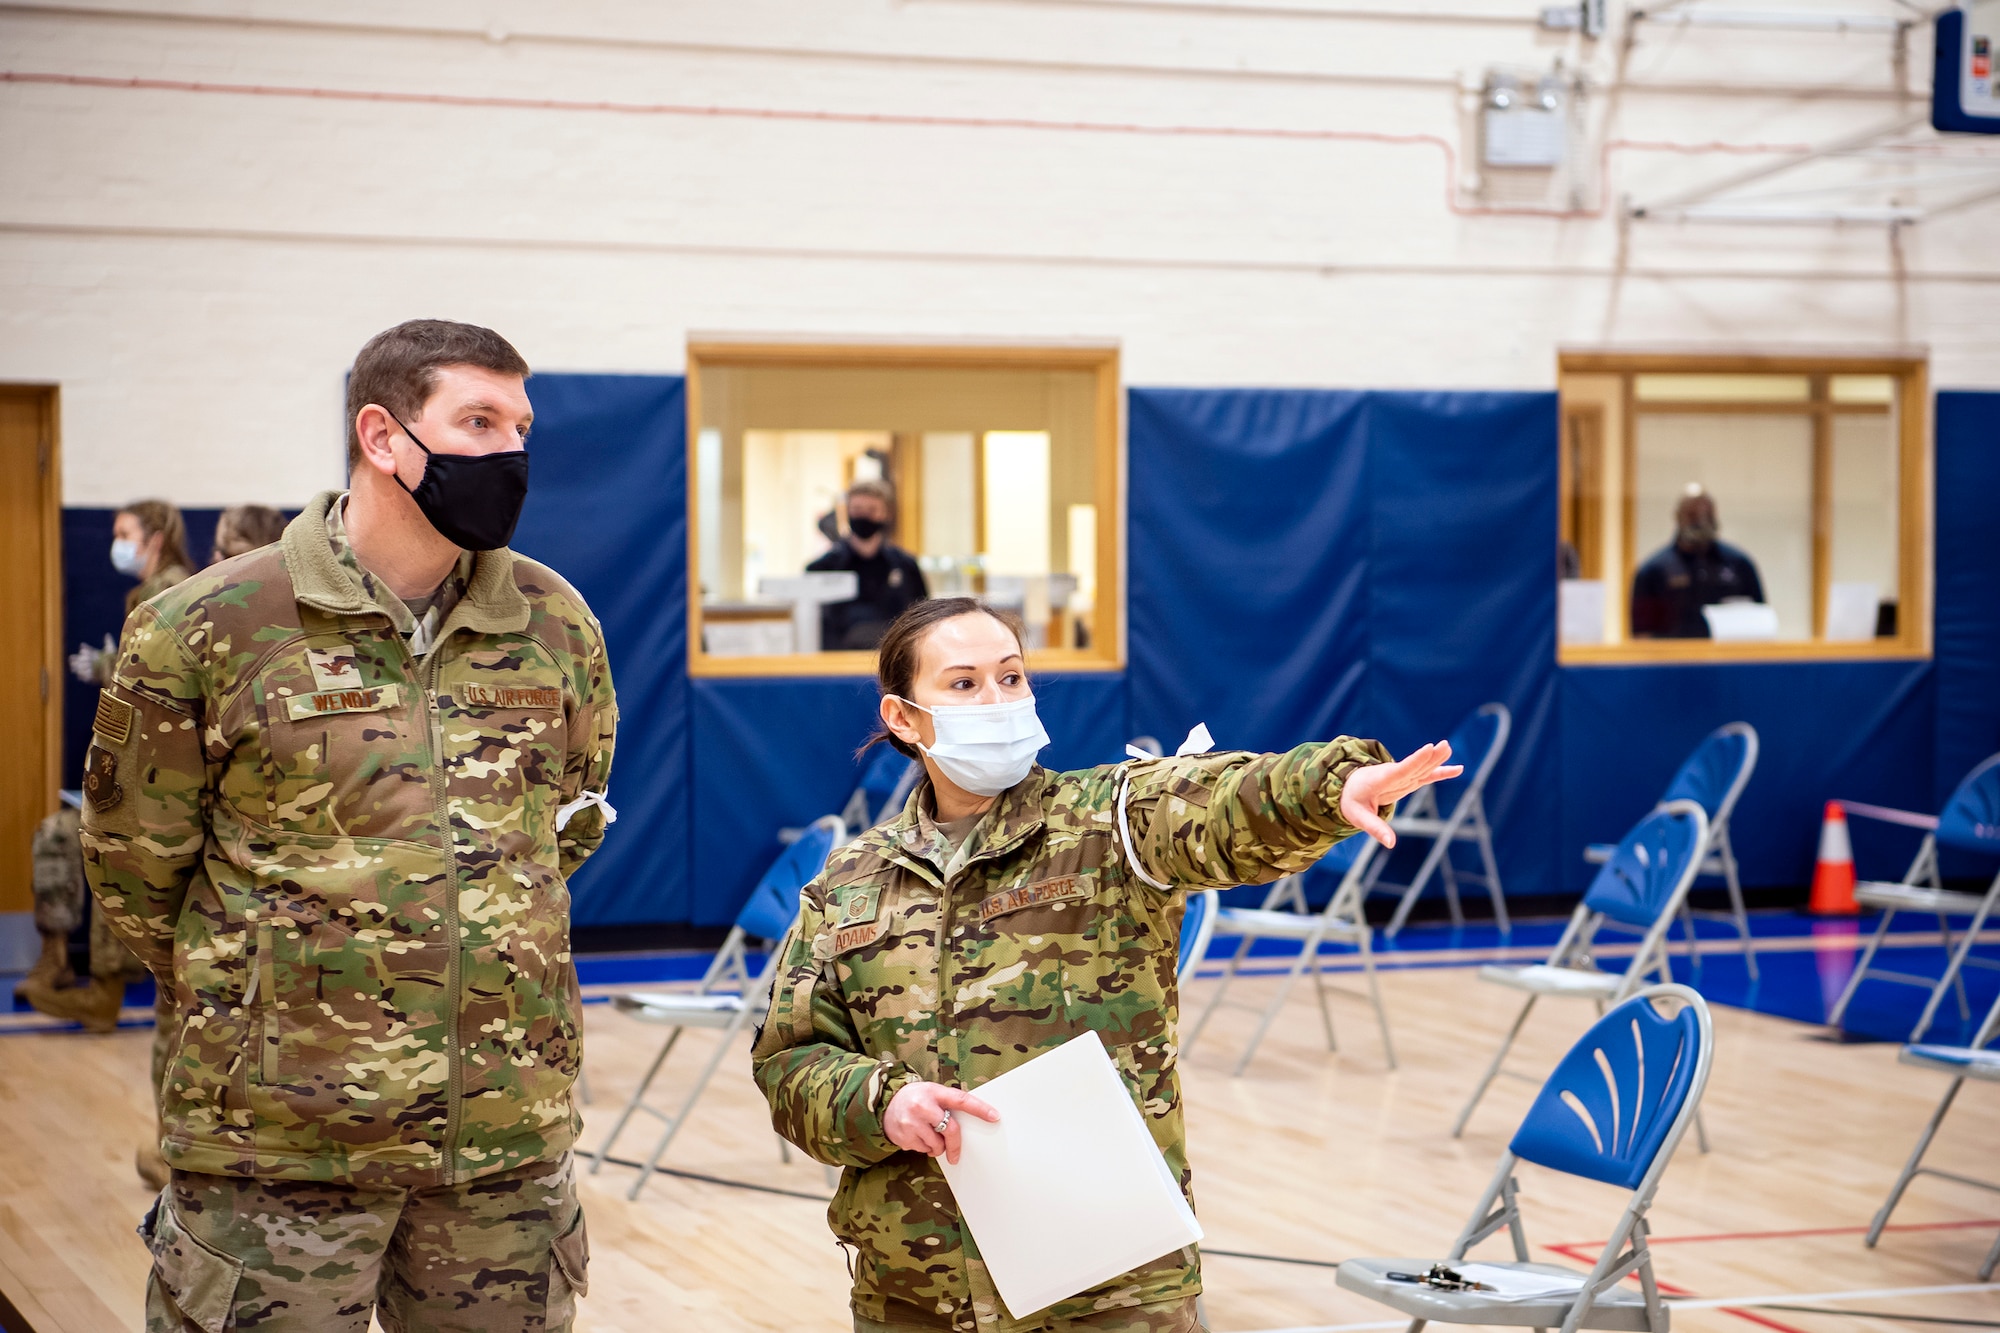 Master Sgt. Terri Adams, right, 423rd Civil Engineering squadron NCO in charge of Emergency management, speaks with Col. Kurt Wendt, 501st Combat Support Wing commander during a mass COVID-19 vaccination line at RAF Alconbury, England, Mar. 18, 2021. This is the first time the 501st CSW has conducted a mass-vaccination line and are expected to vaccinate approximately 300 people. Adams along with multiple Airmen and civilians from the 423rd Medical, Civil Engineering, Emergency management and Communication squadrons assisted in helping vaccines be distributed to the pathfinder community. (U.S. Air Force photo by Senior Airman Eugene Oliver)